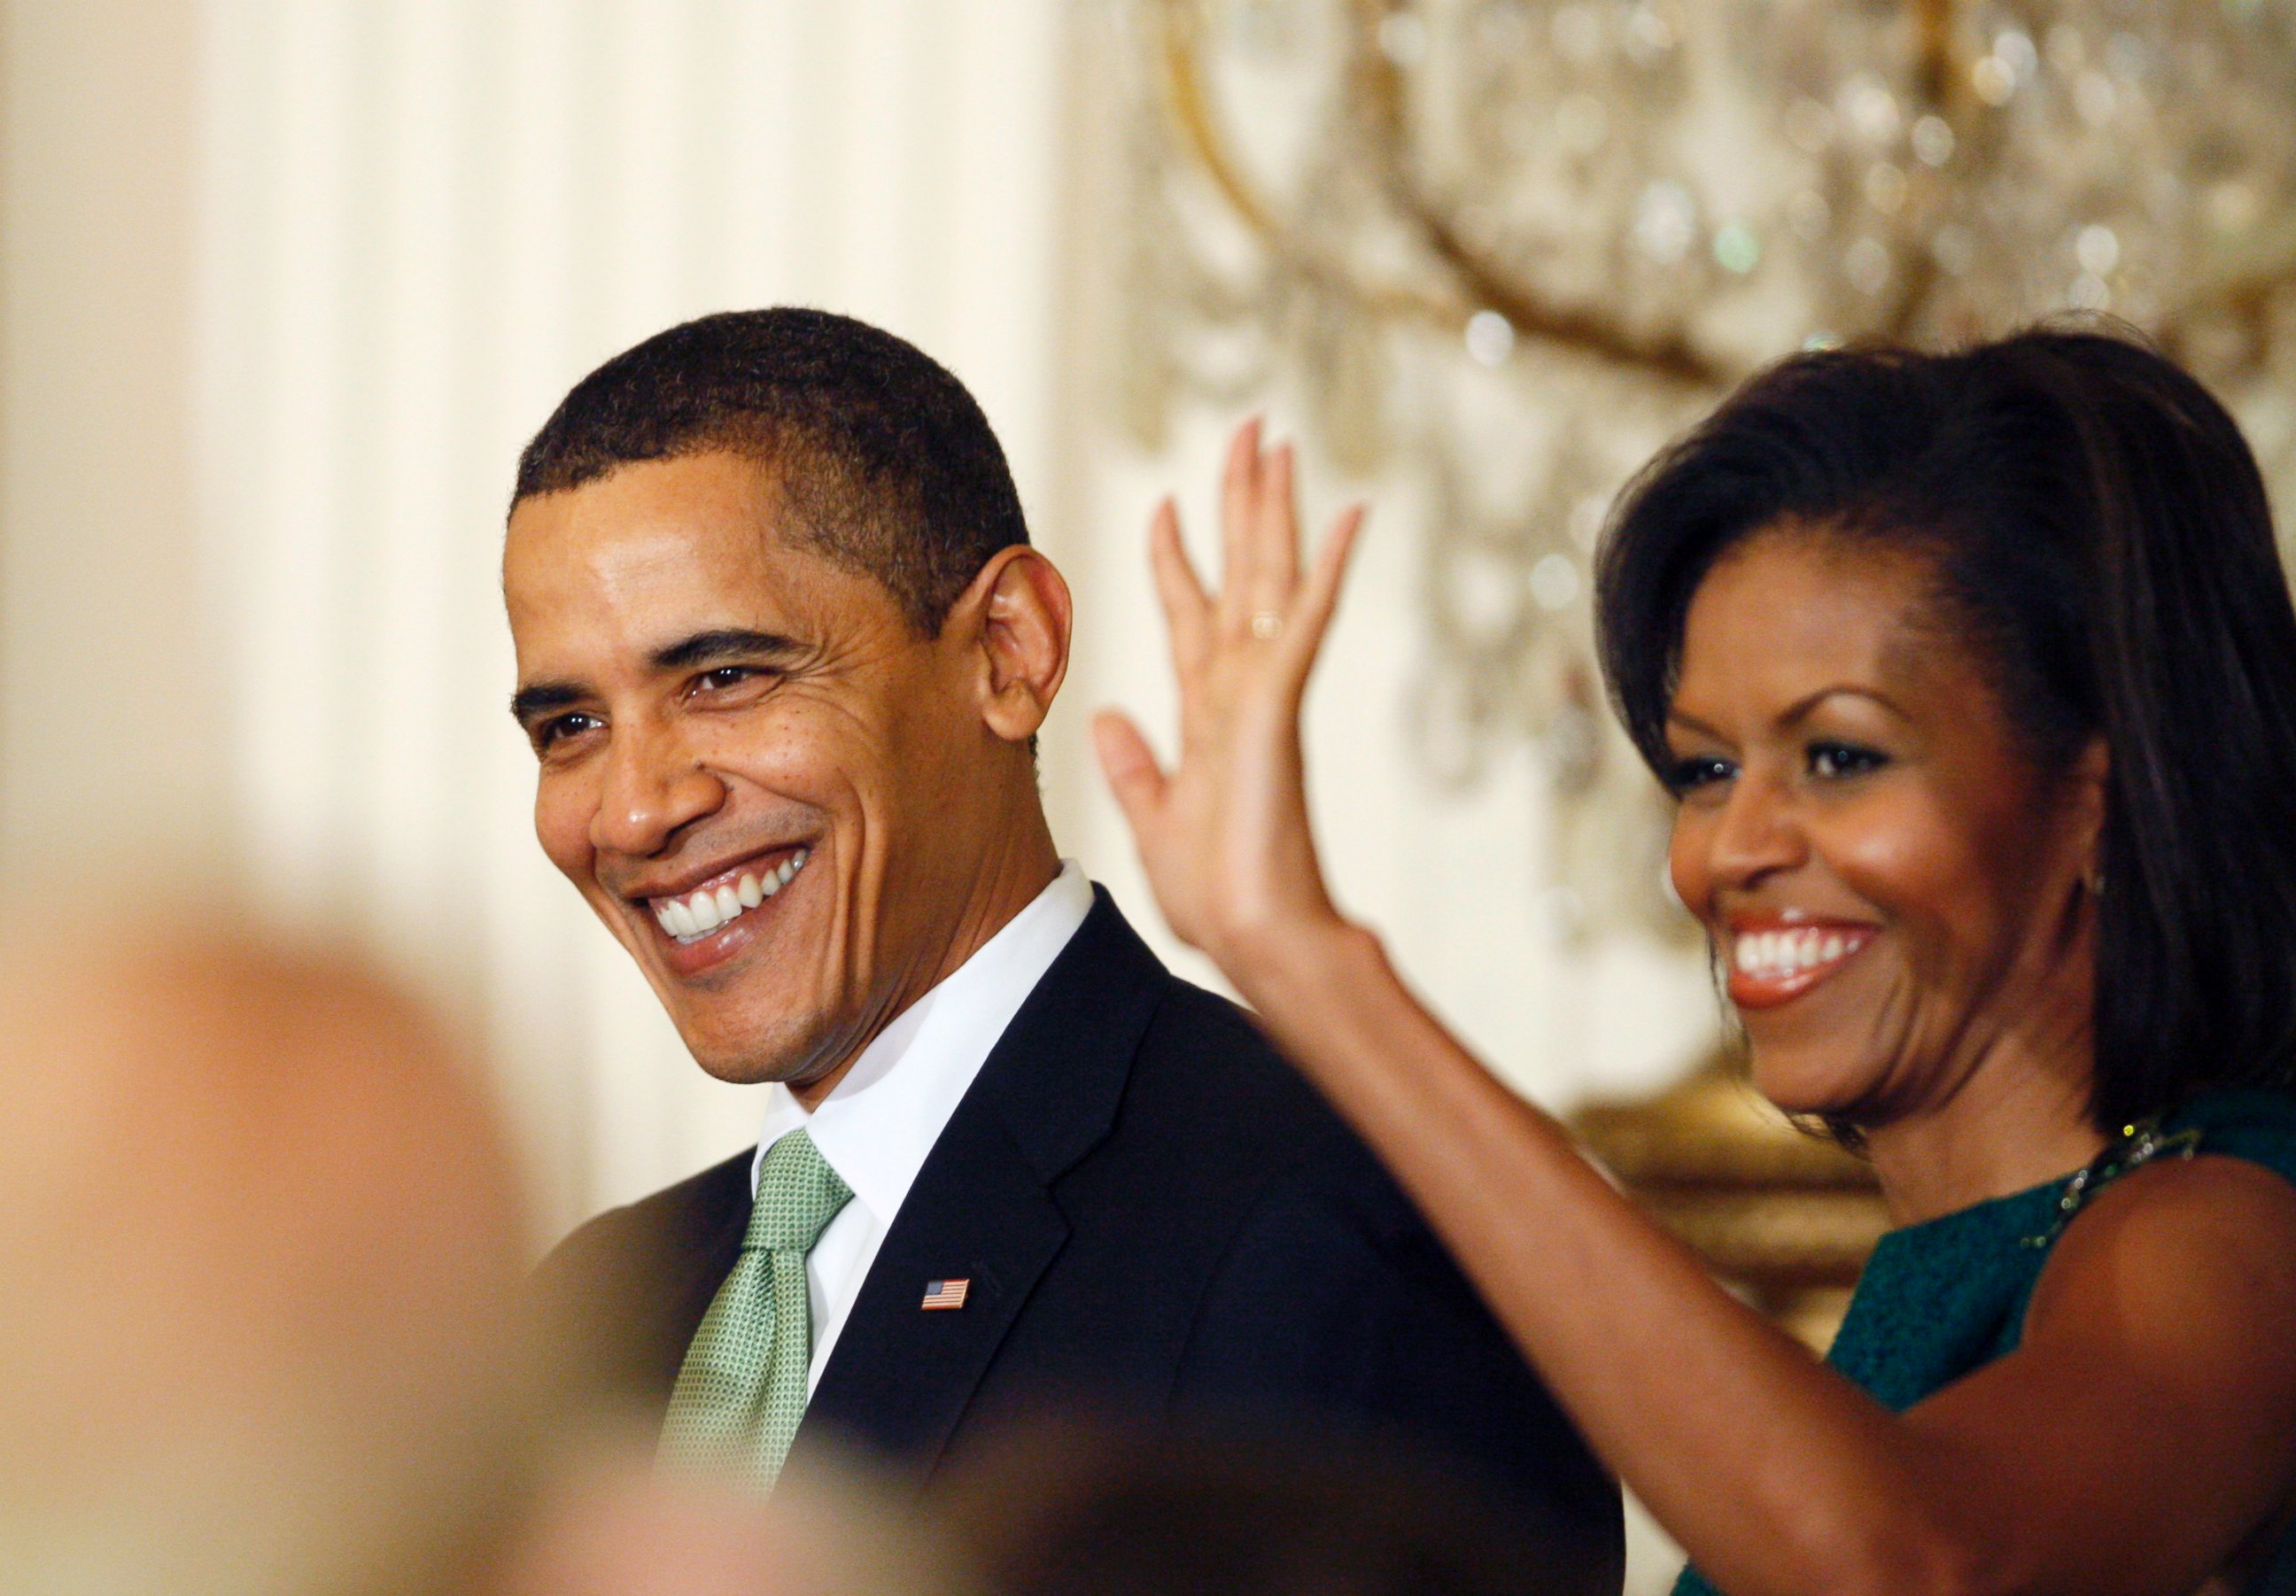 PHOTO: President Barack Obama and Michelle Obama arrive in the East Room of the White House in Washington as they host a St. Patrick's Day reception, March 17, 2009.